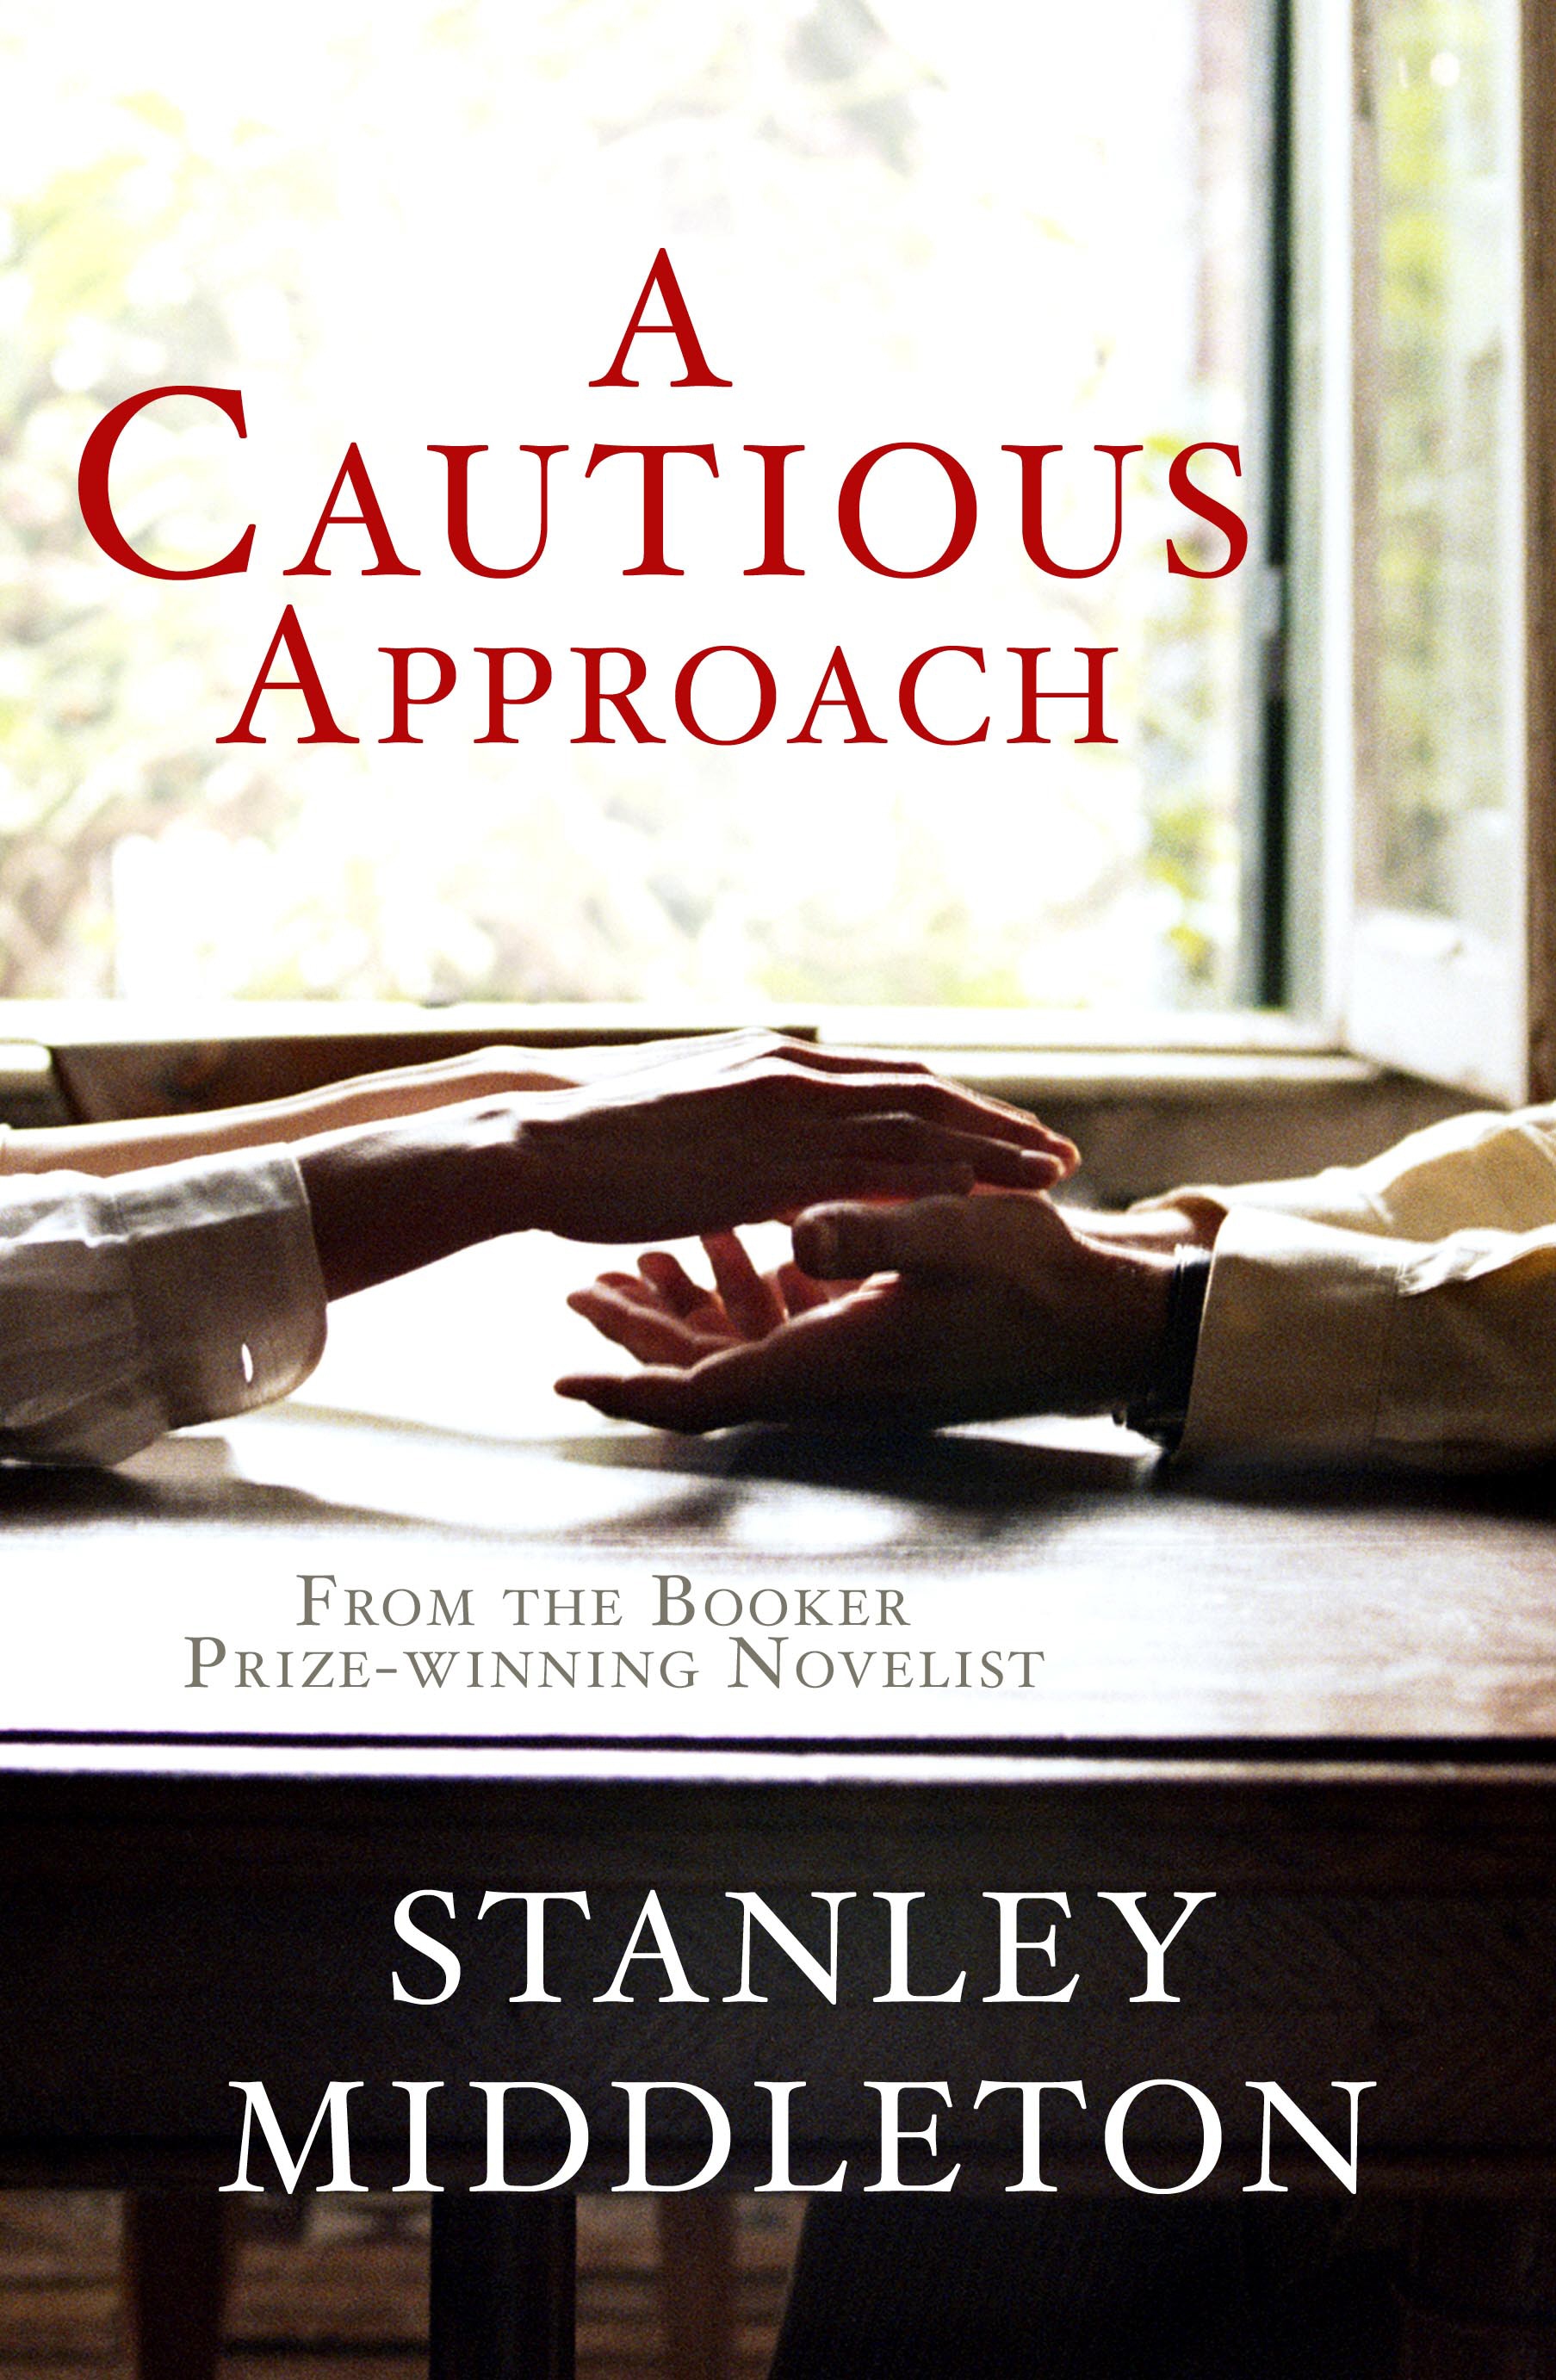 Book “A Cautious Approach” by Stanley Middleton — November 28, 2019